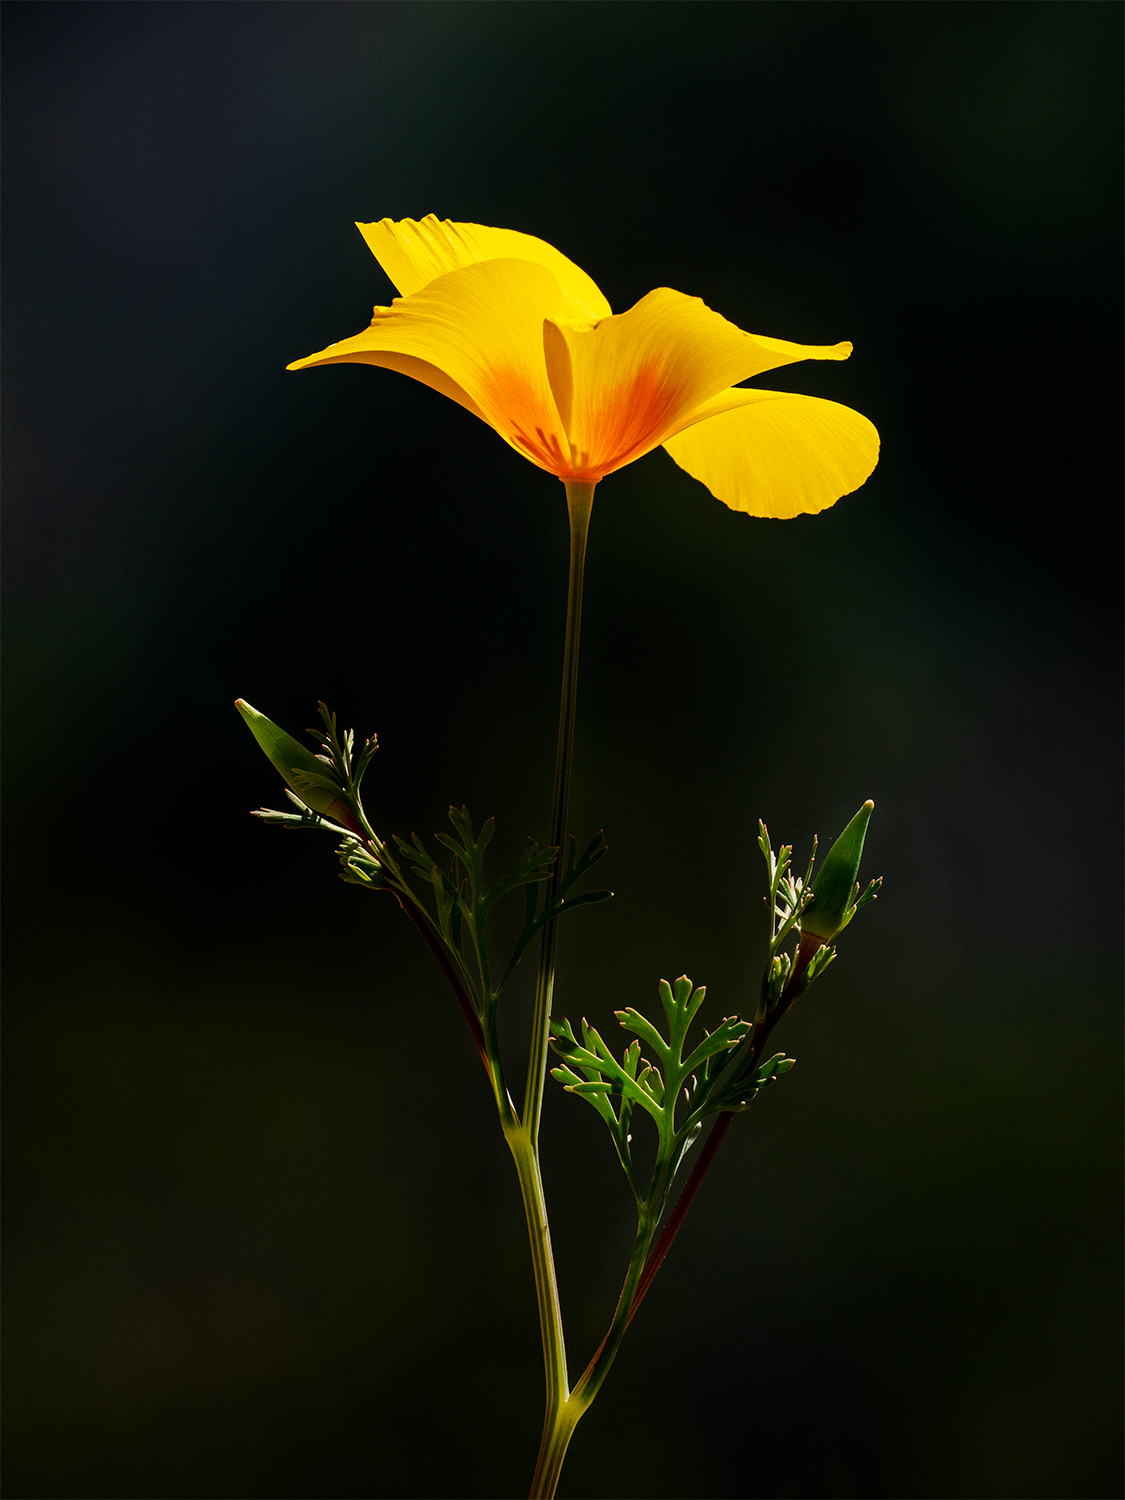 A single Mexican gold poppy